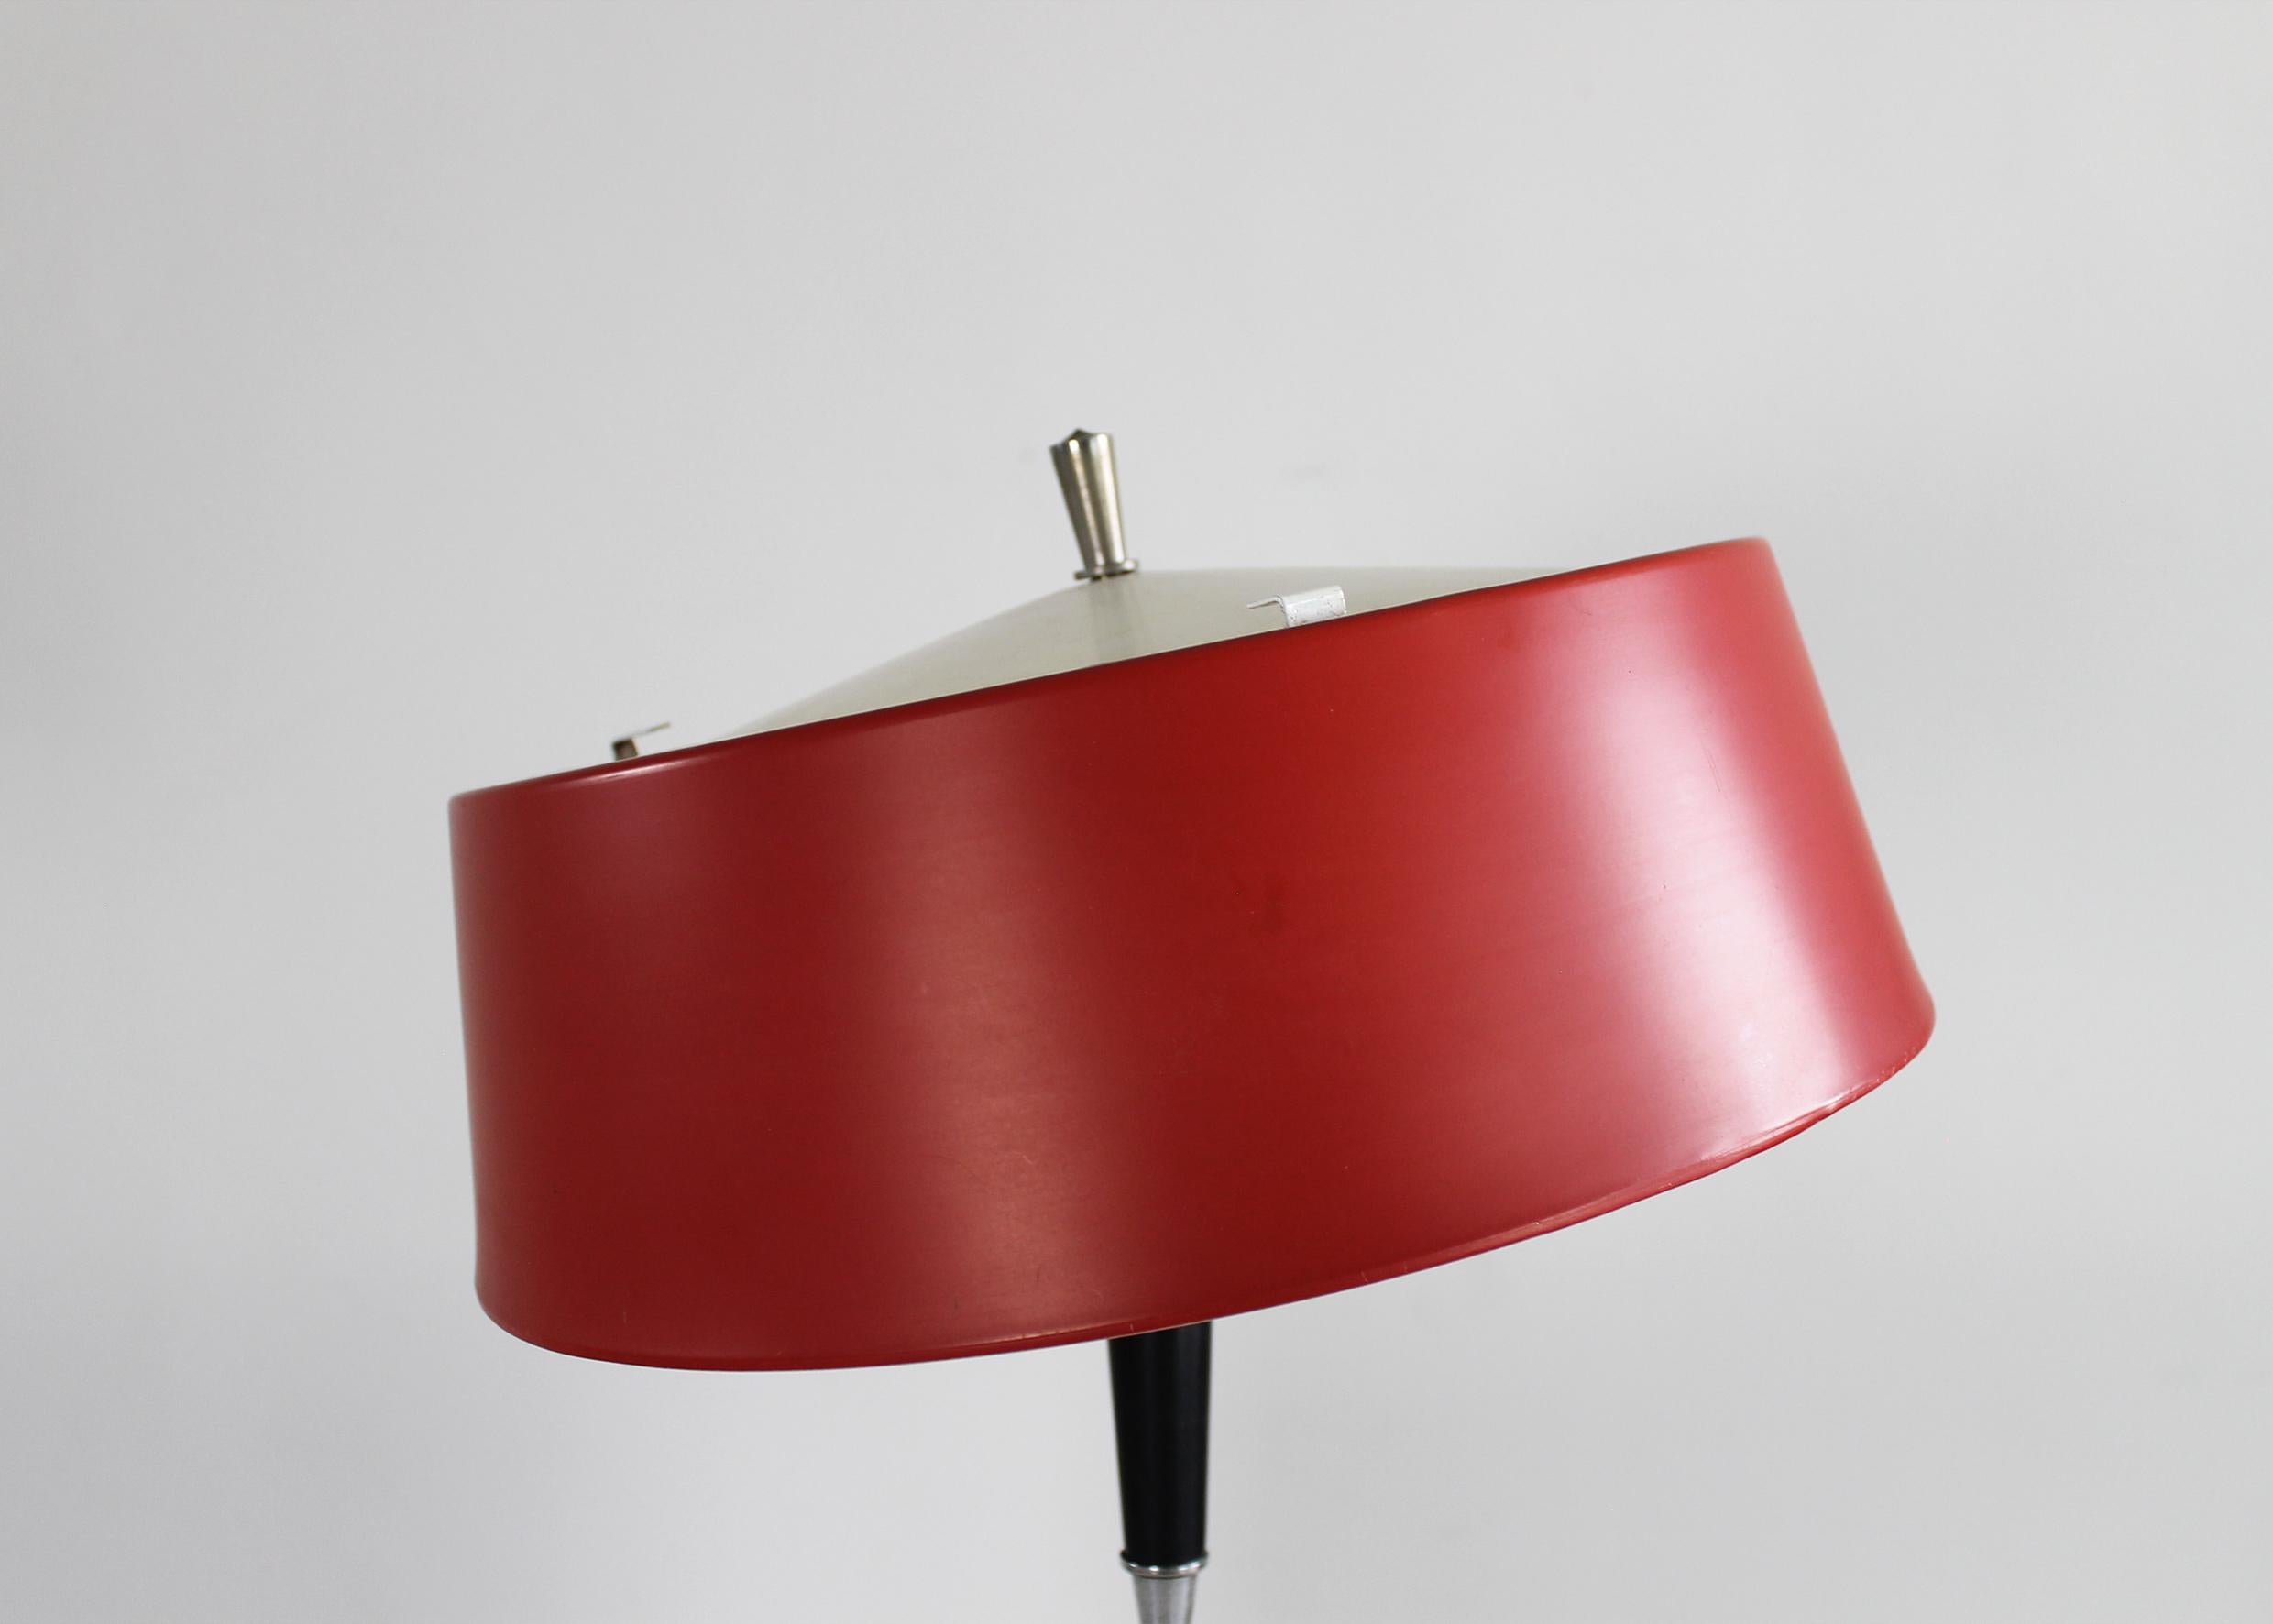 Mid-Century Modern Vintage Table Lamp in Red Lacquered Aluminum by Oscar Torlasco 1950s Italy For Sale